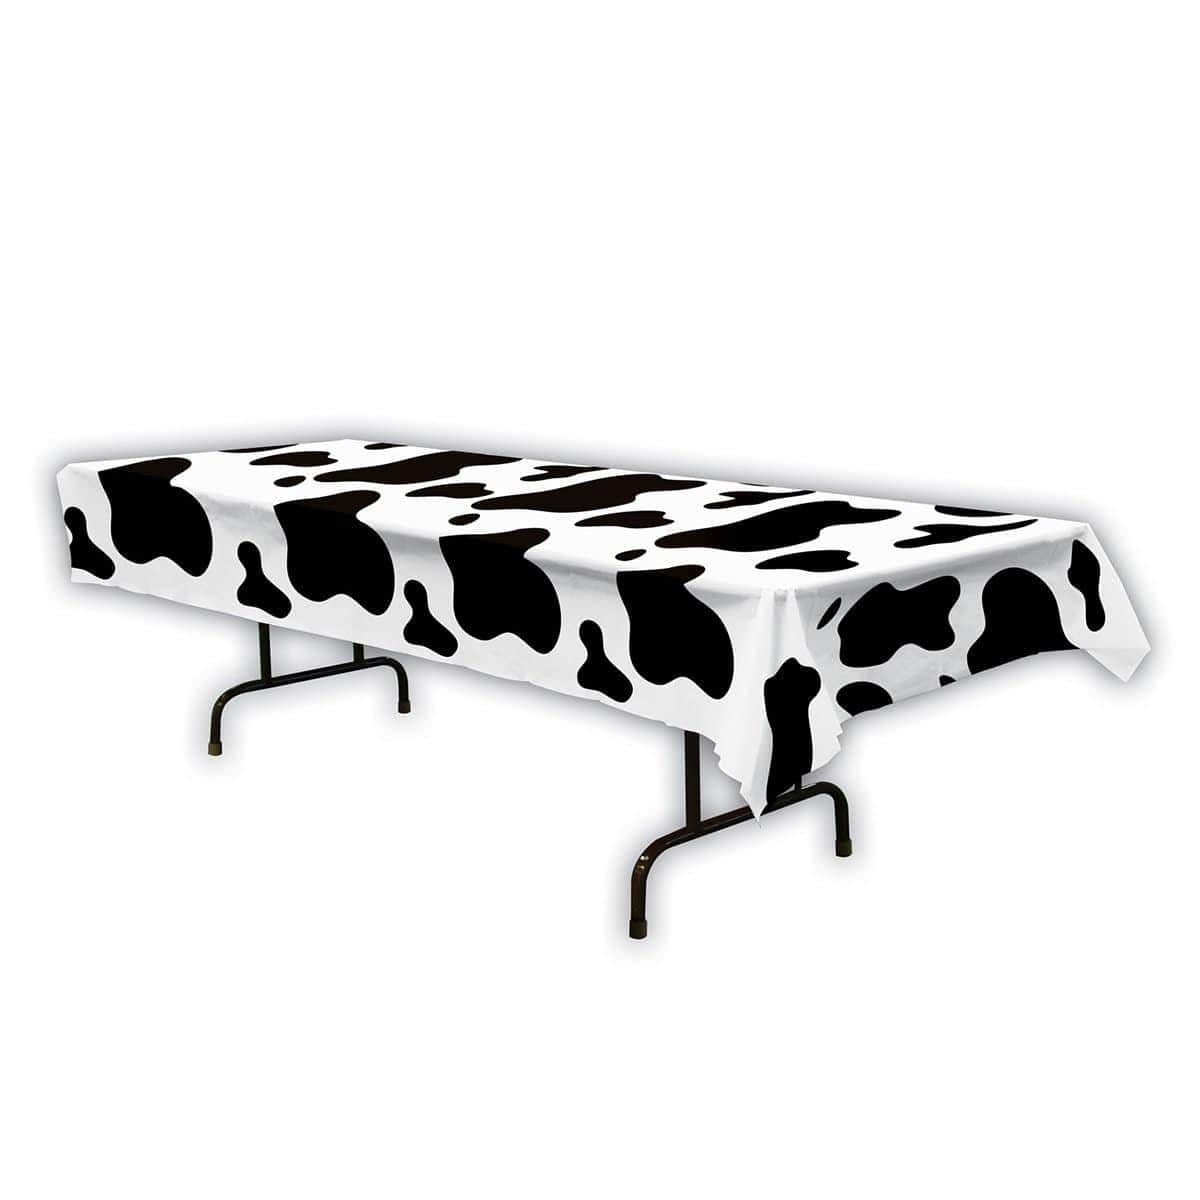 Buy Theme Party Western Plastic Tablecover sold at Party Expert